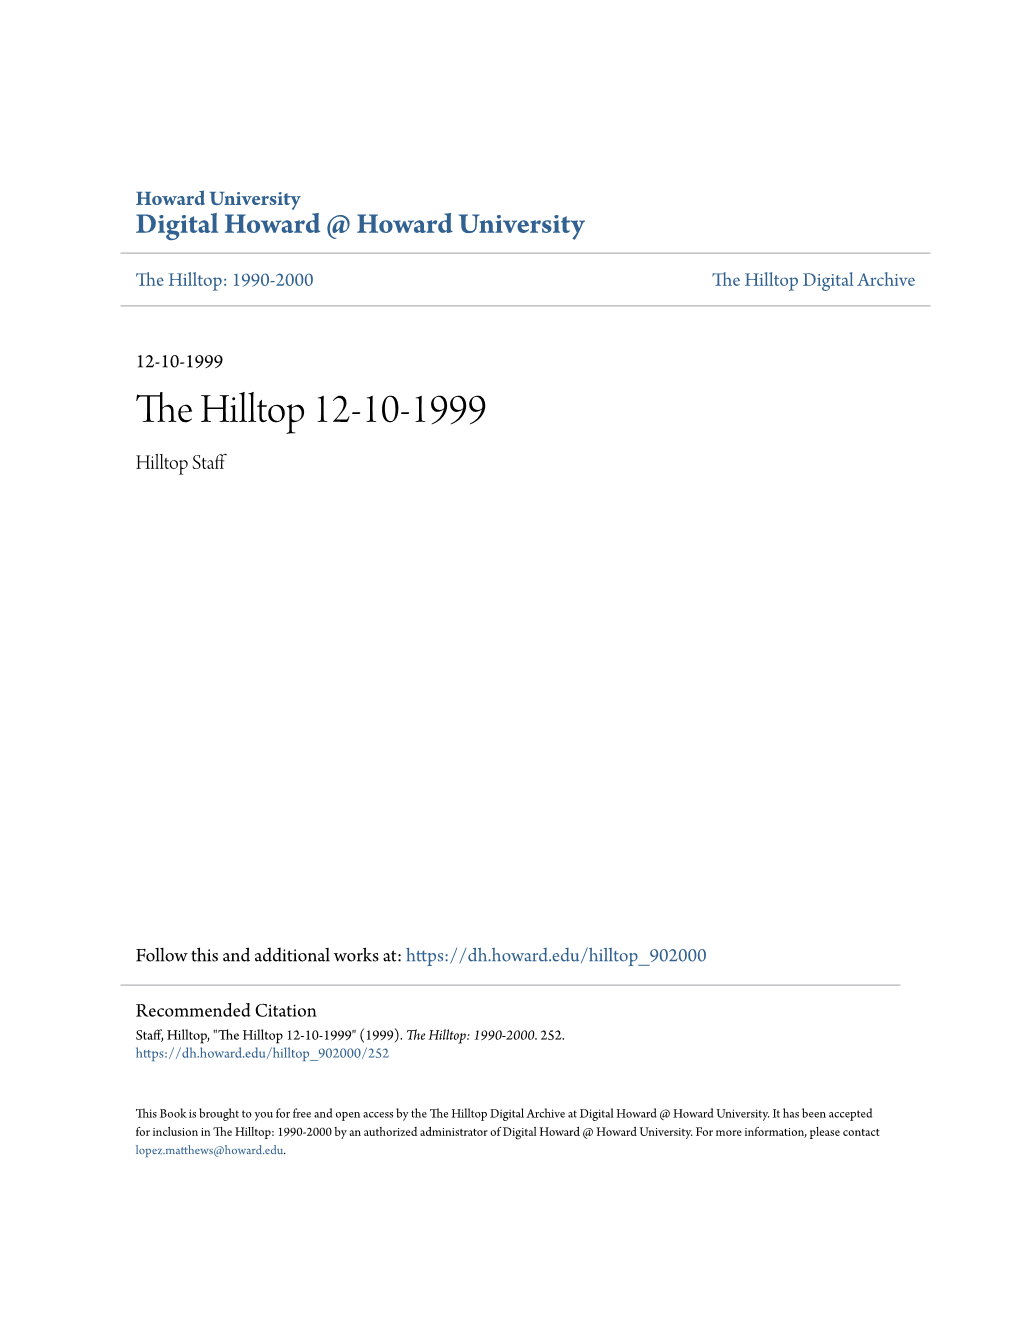 The Hilltop 12-10-1999